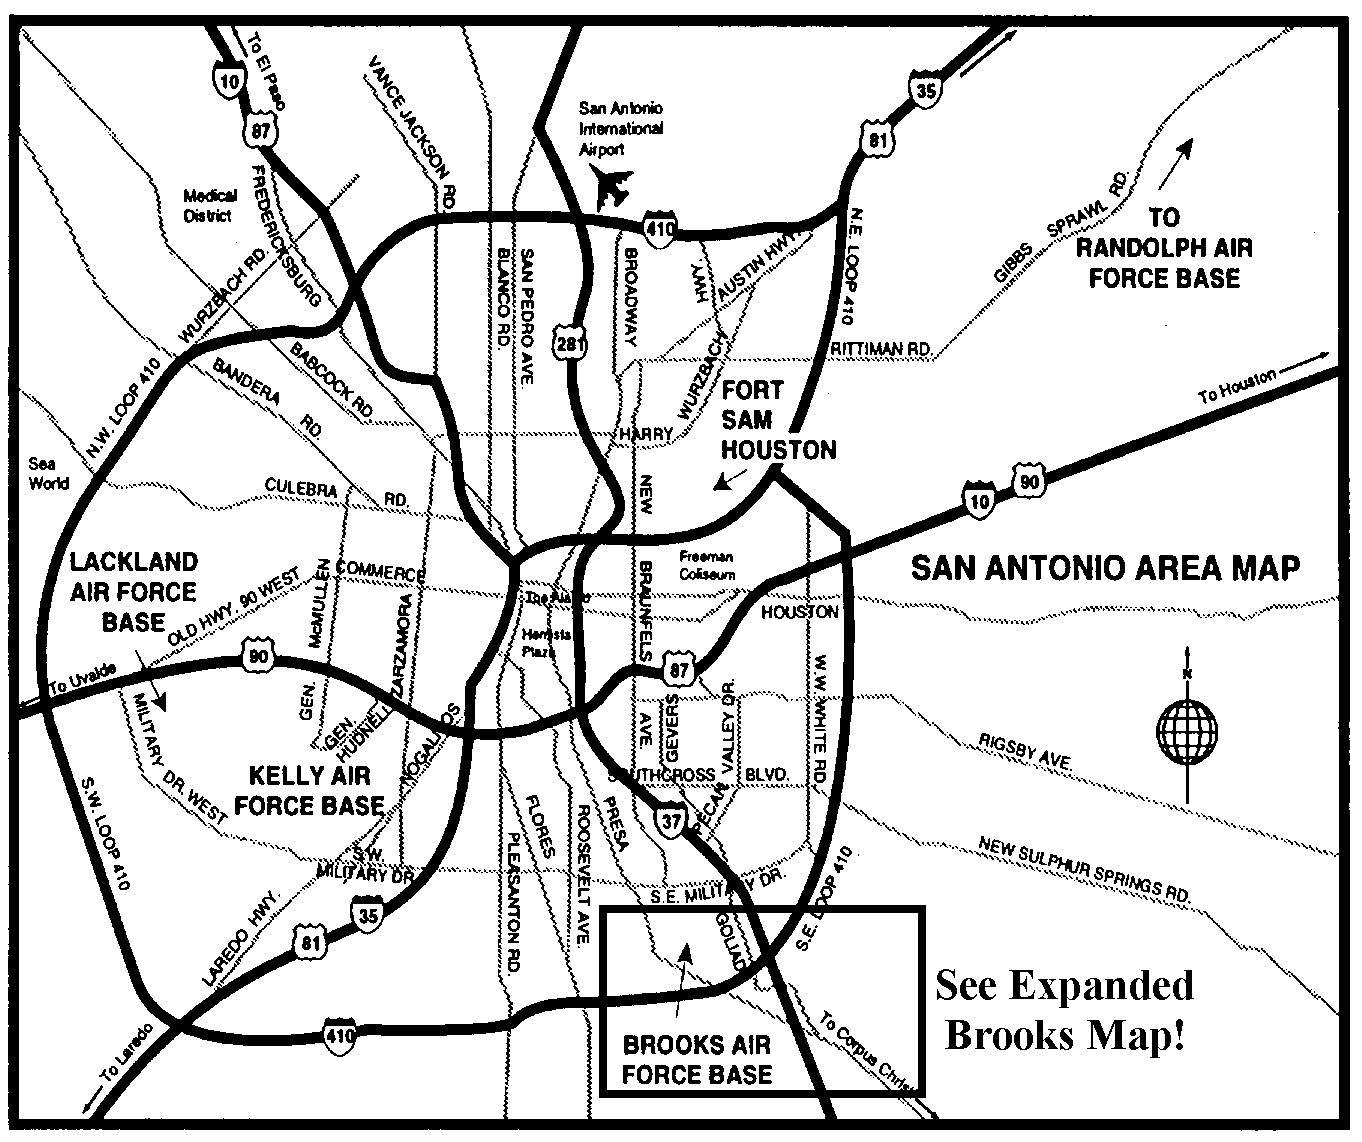 Map to Brooks AFB - See Detail to Right